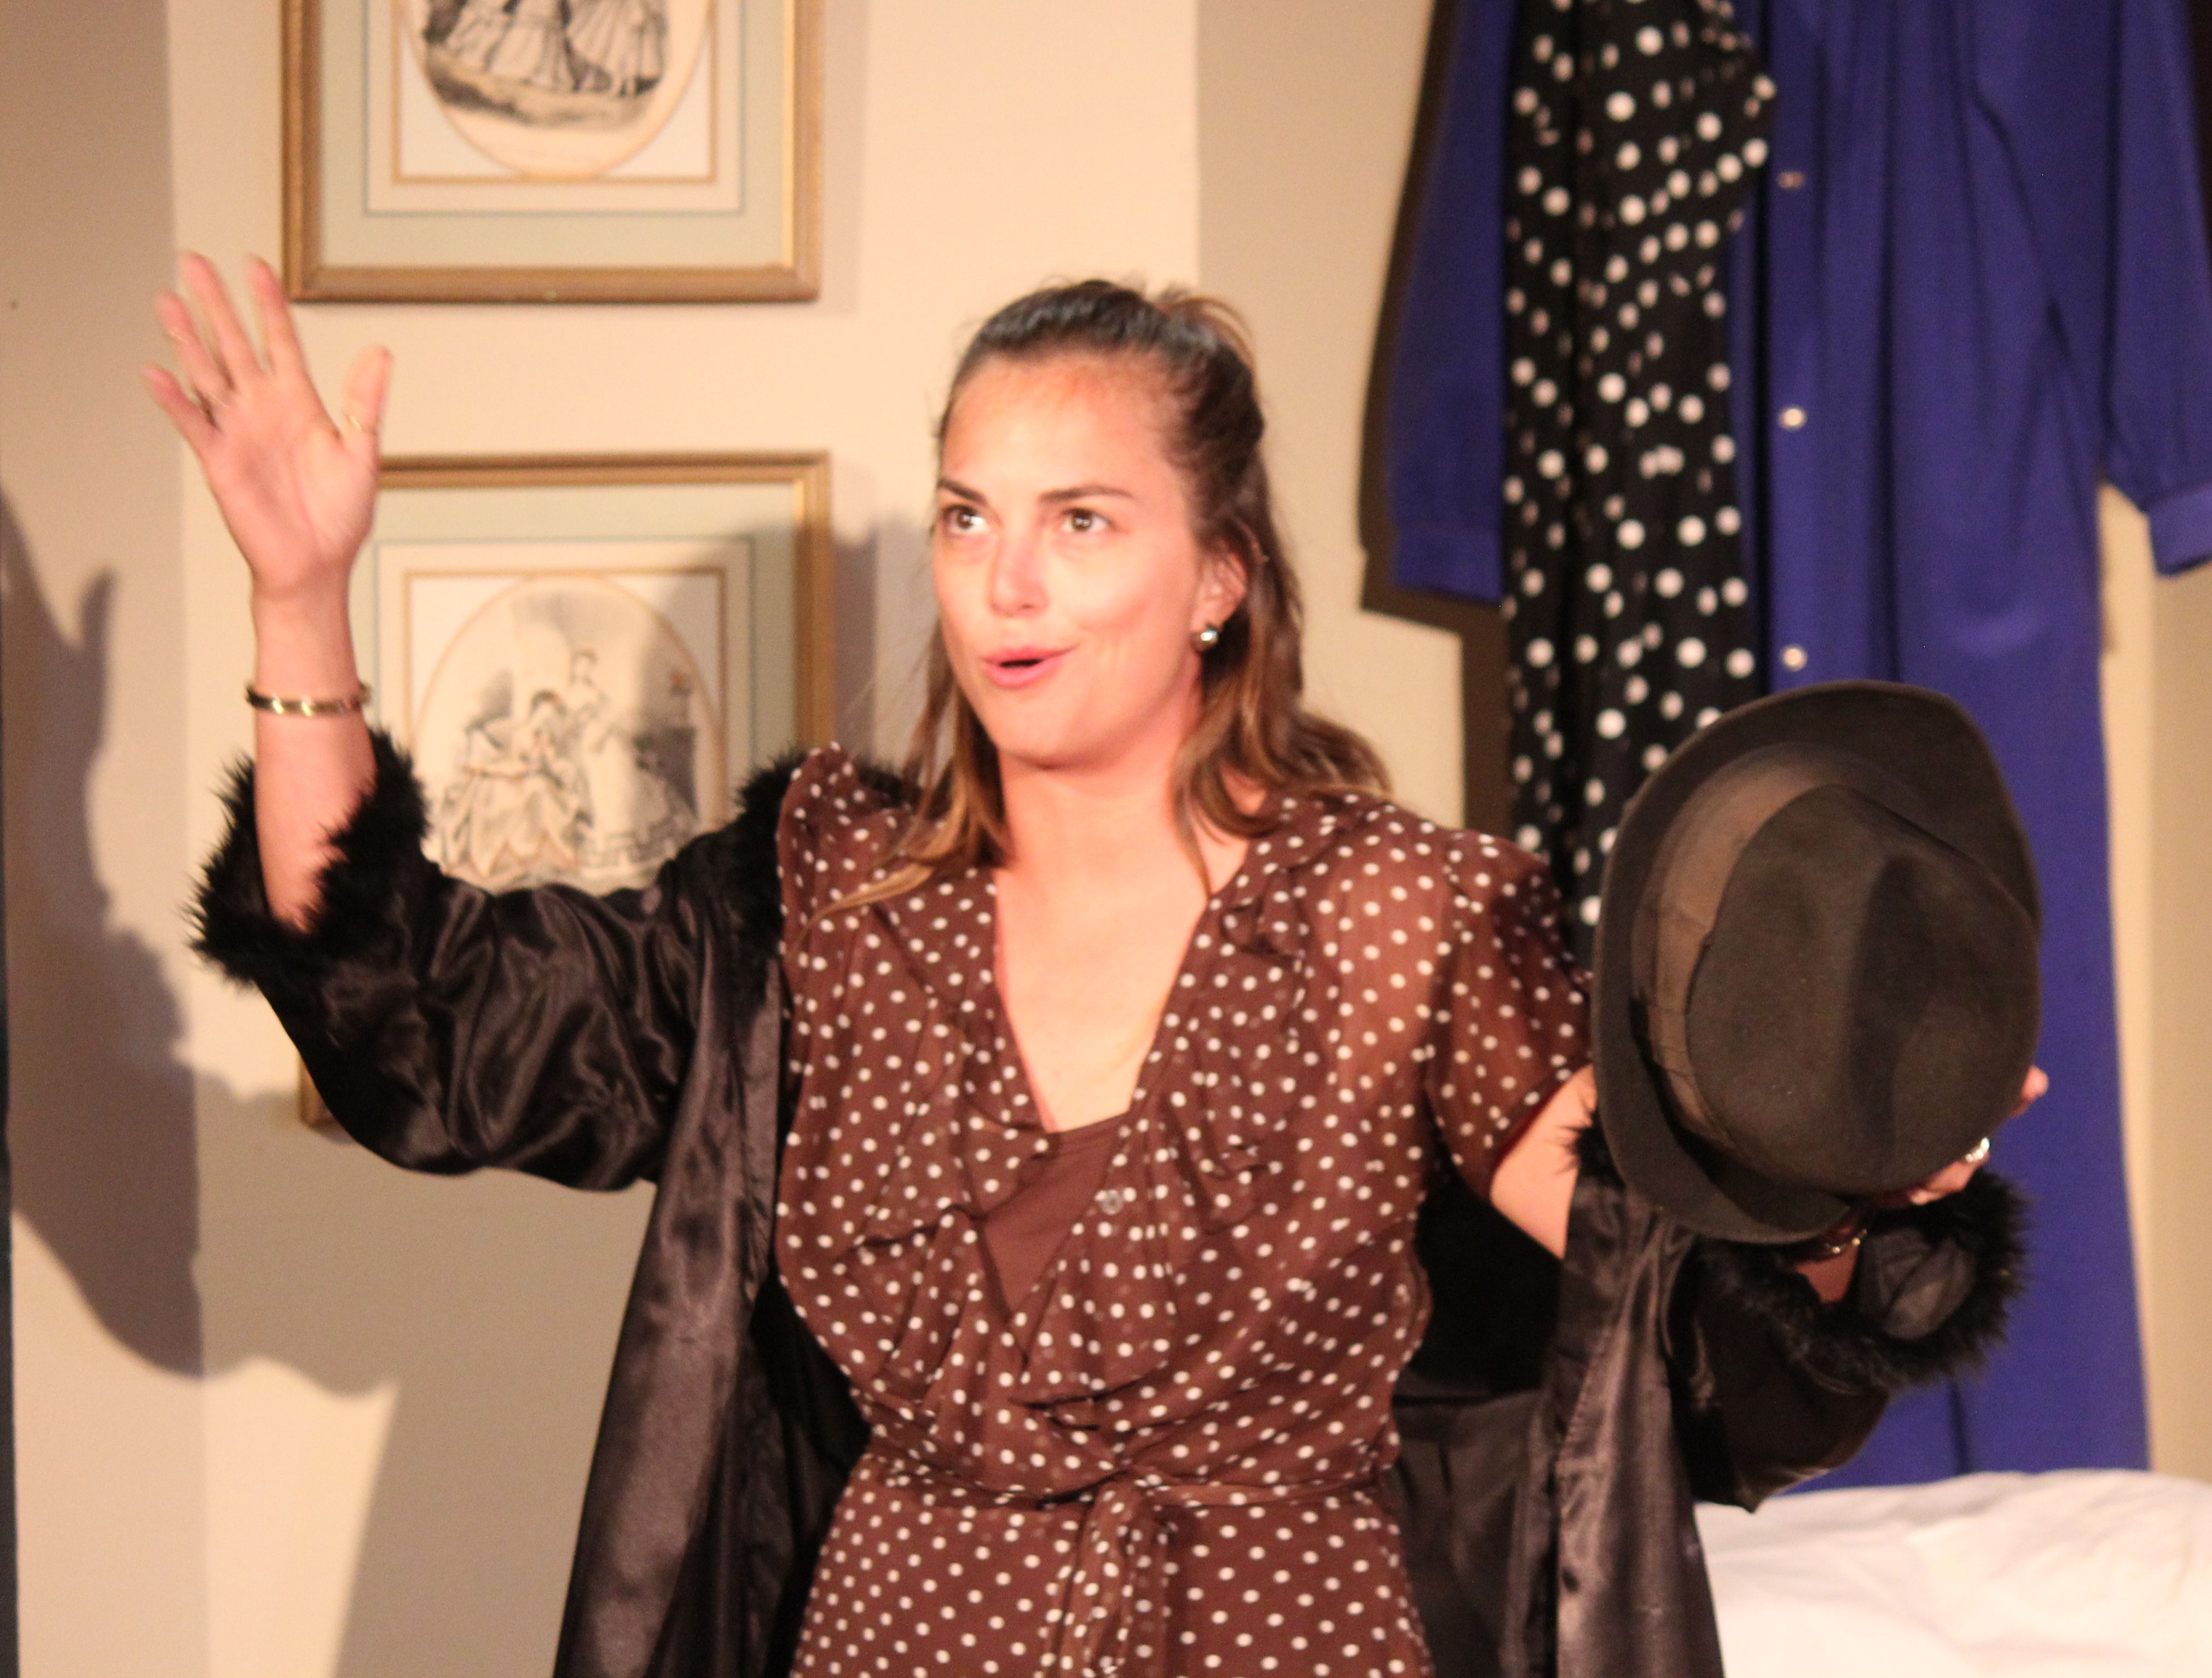 Cristina Villarreal plays older Helen in the production of Hollywood Arms
Photo Credit Tom Hall